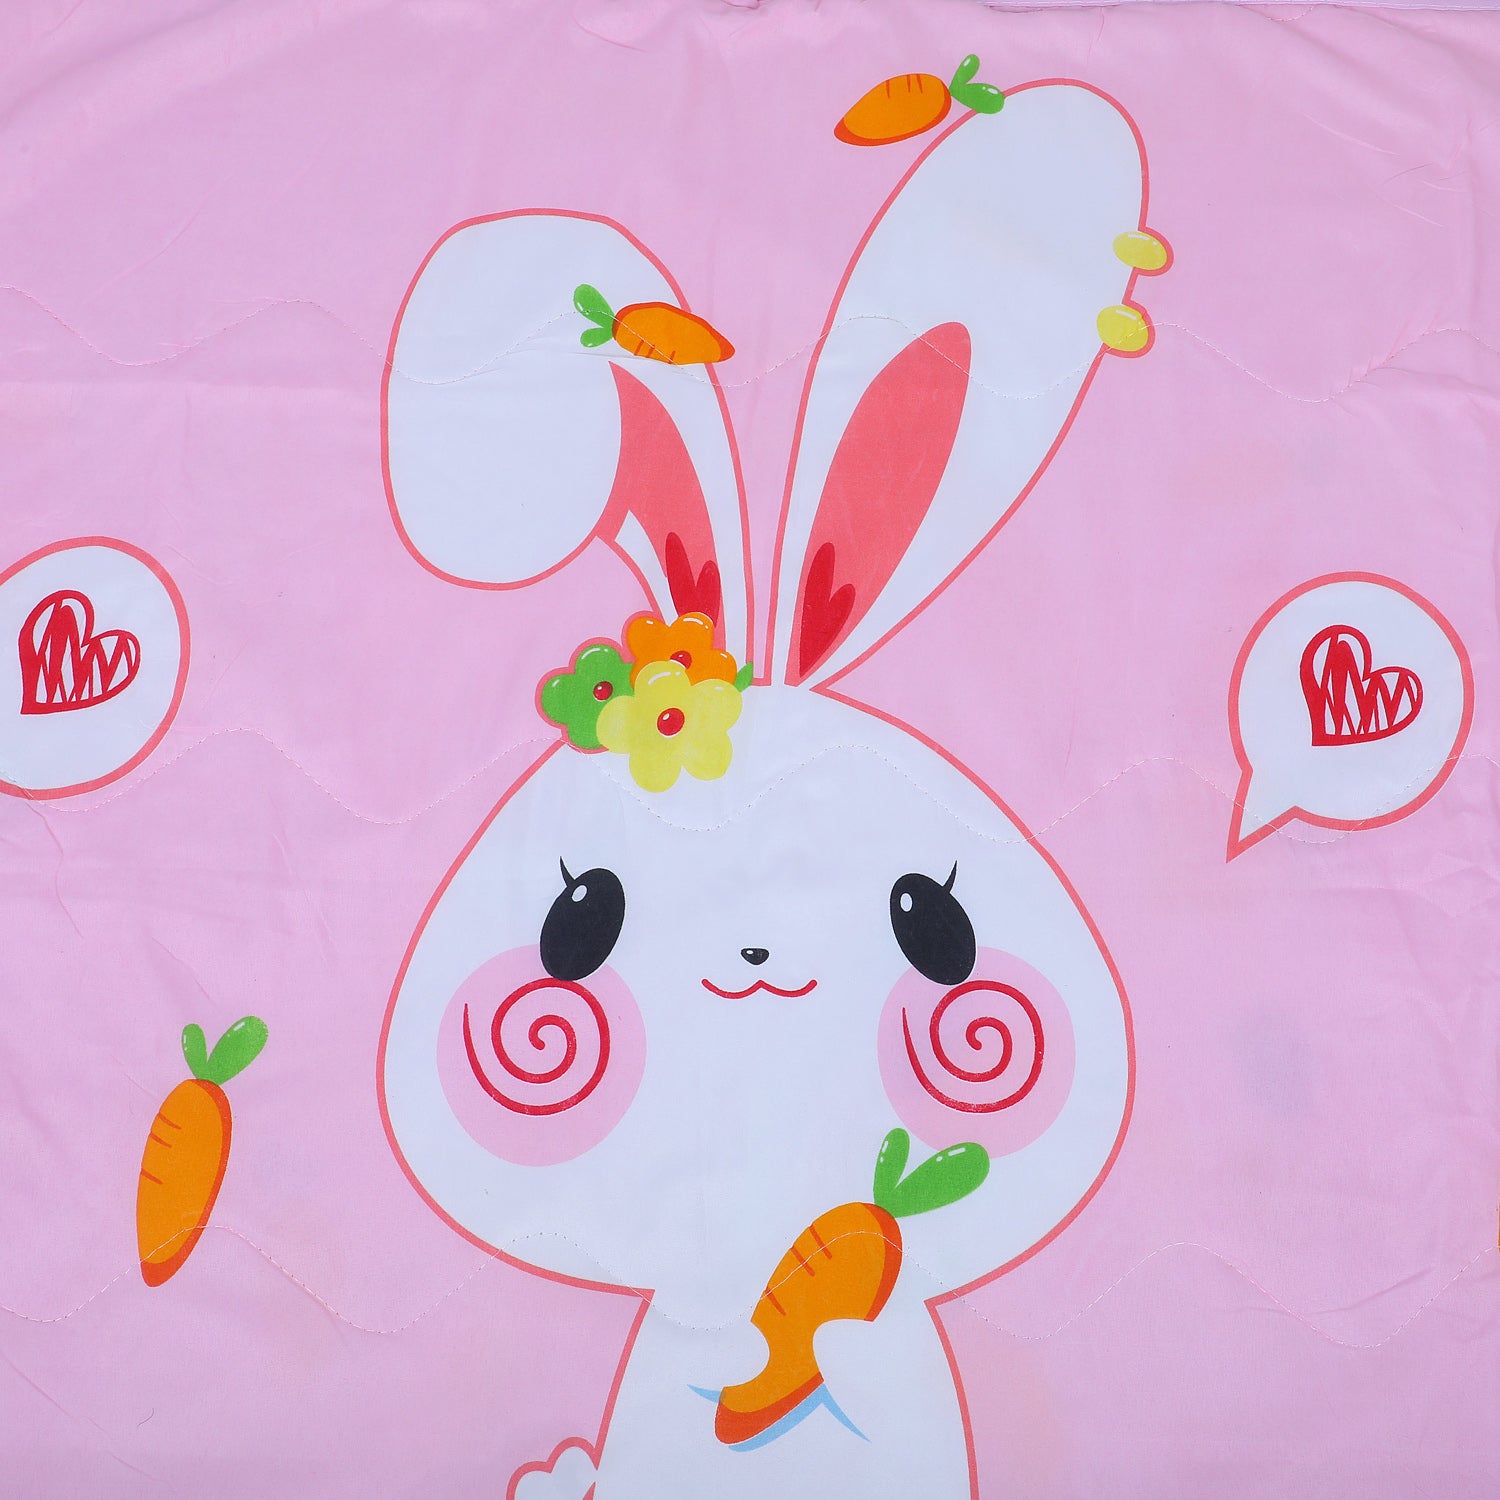 Baby Moo Hungry Bunny Soft Quilted Premium Reversible Blanket - Pink